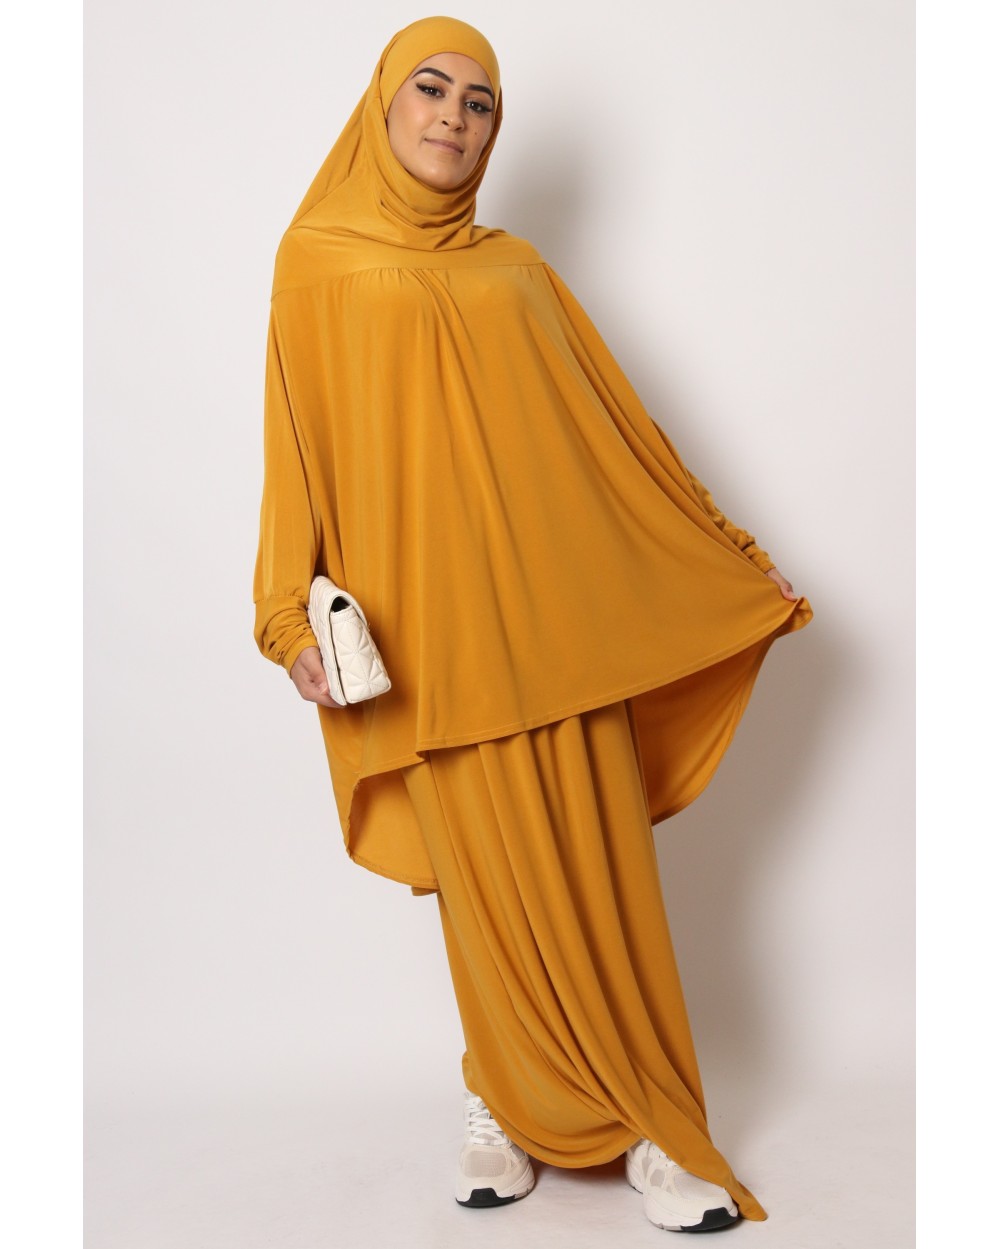 Jilbab style cape and skirt